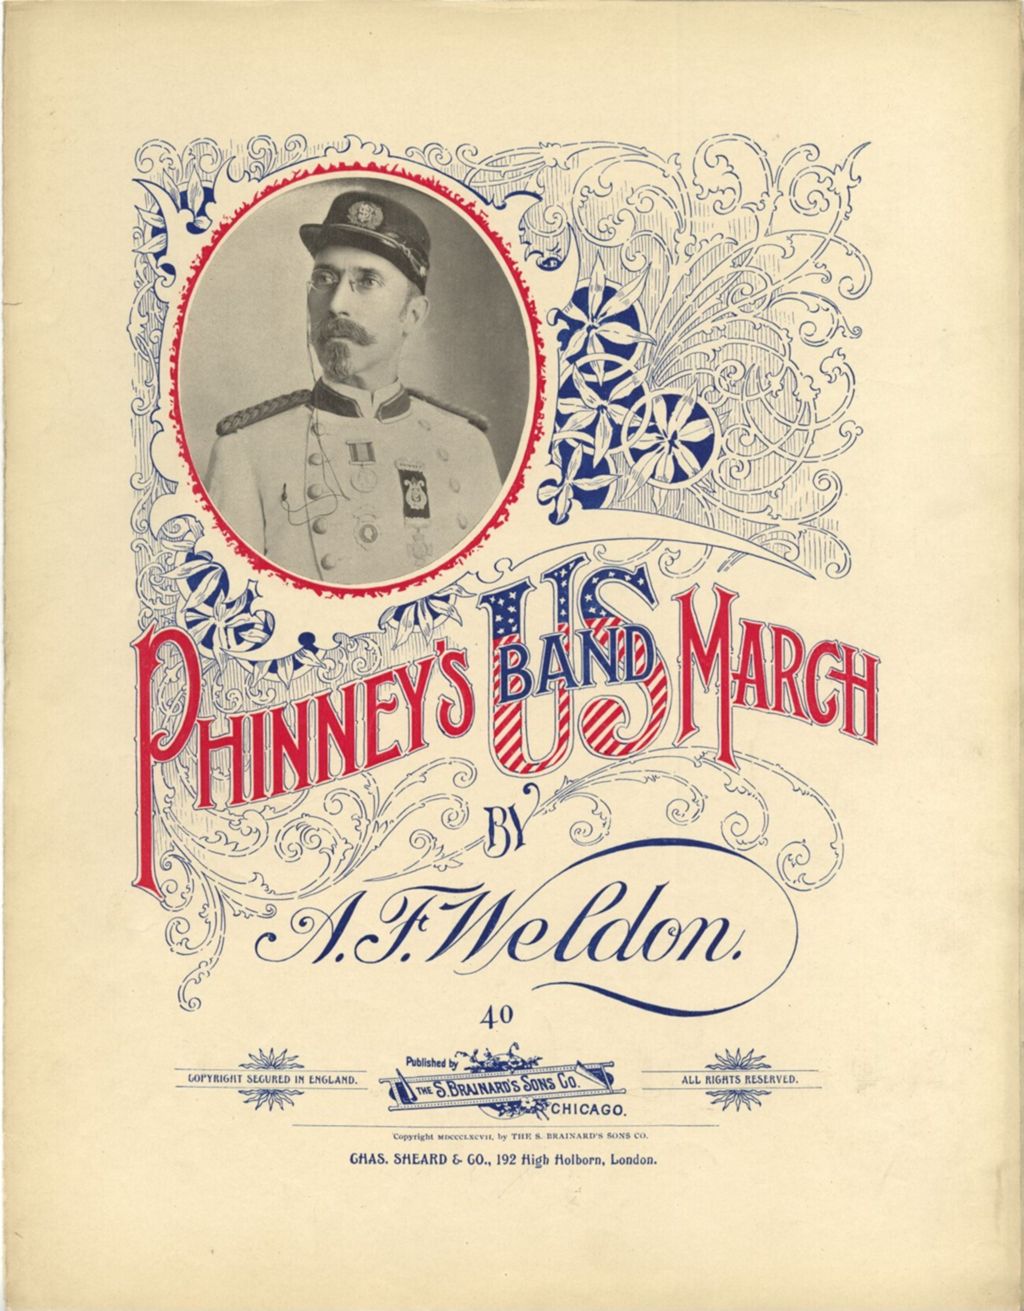 Phinney's U.S. Band March